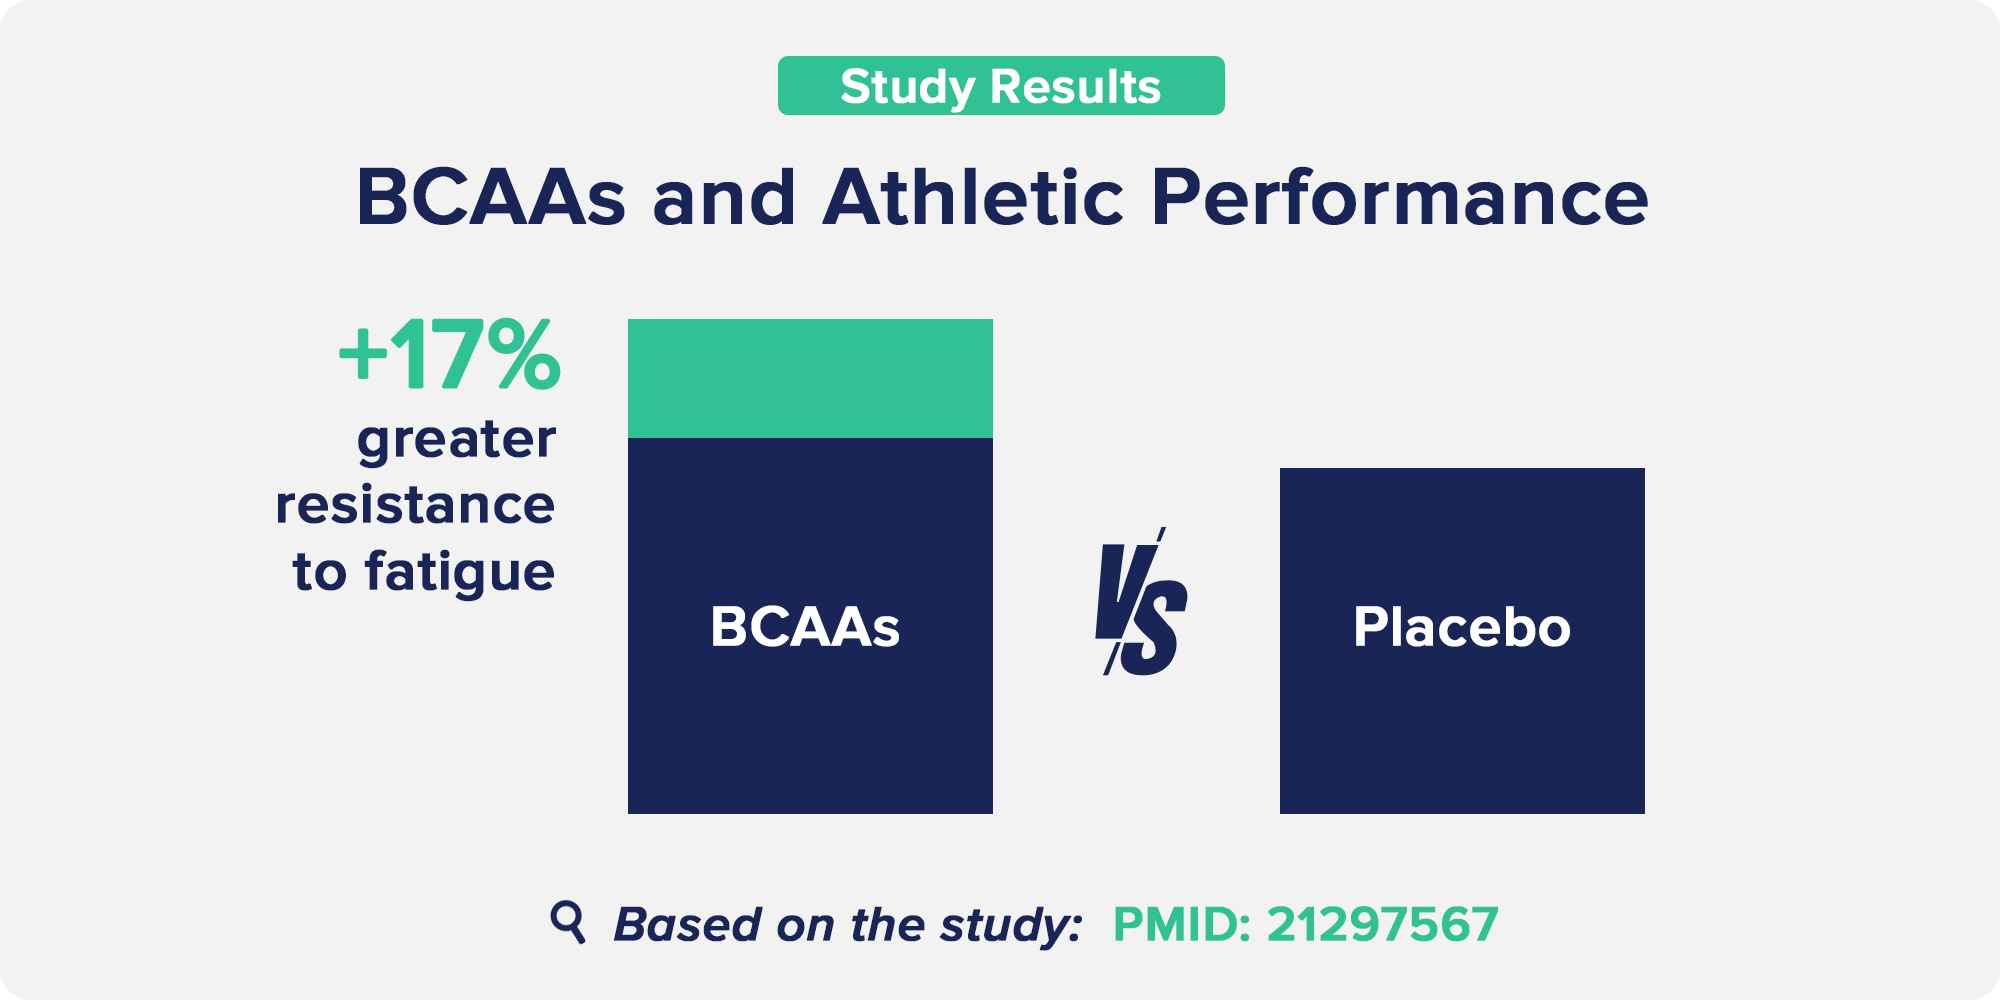 BCAAs and Athletic Performance